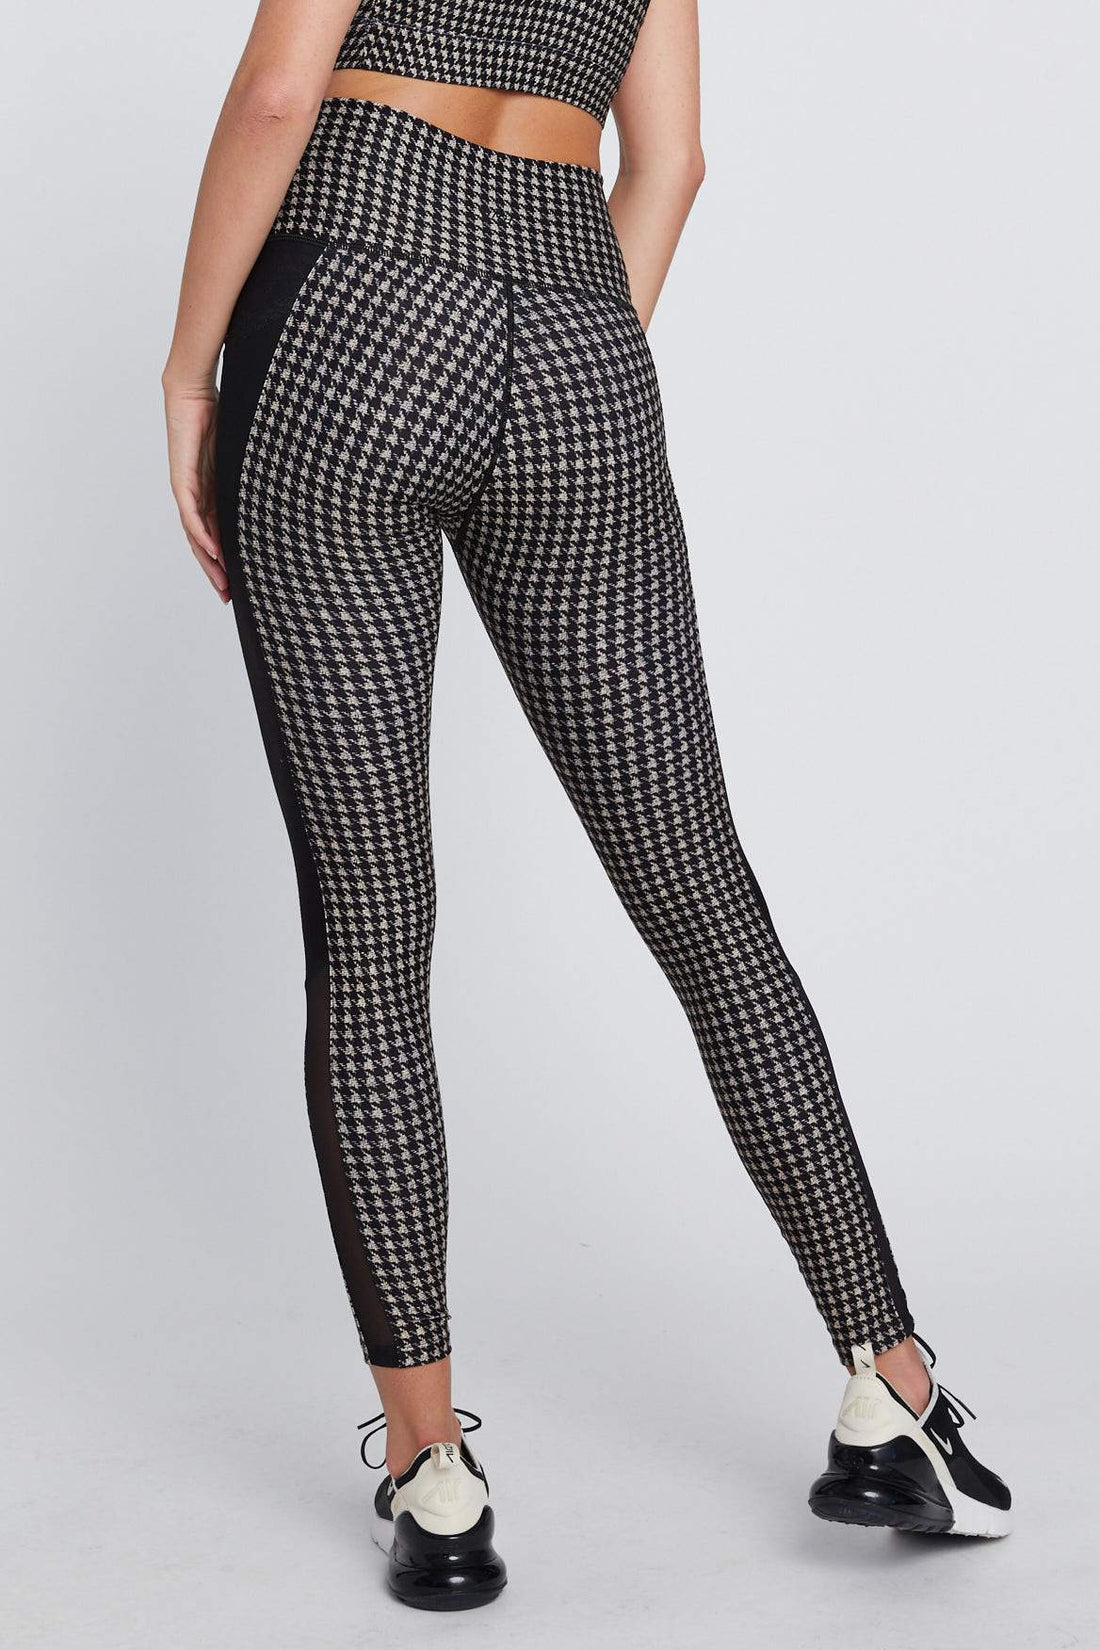 Women's Houndstooth Leggings, Perfect for the Office, Work From Home or for  Casual Wear -  Canada